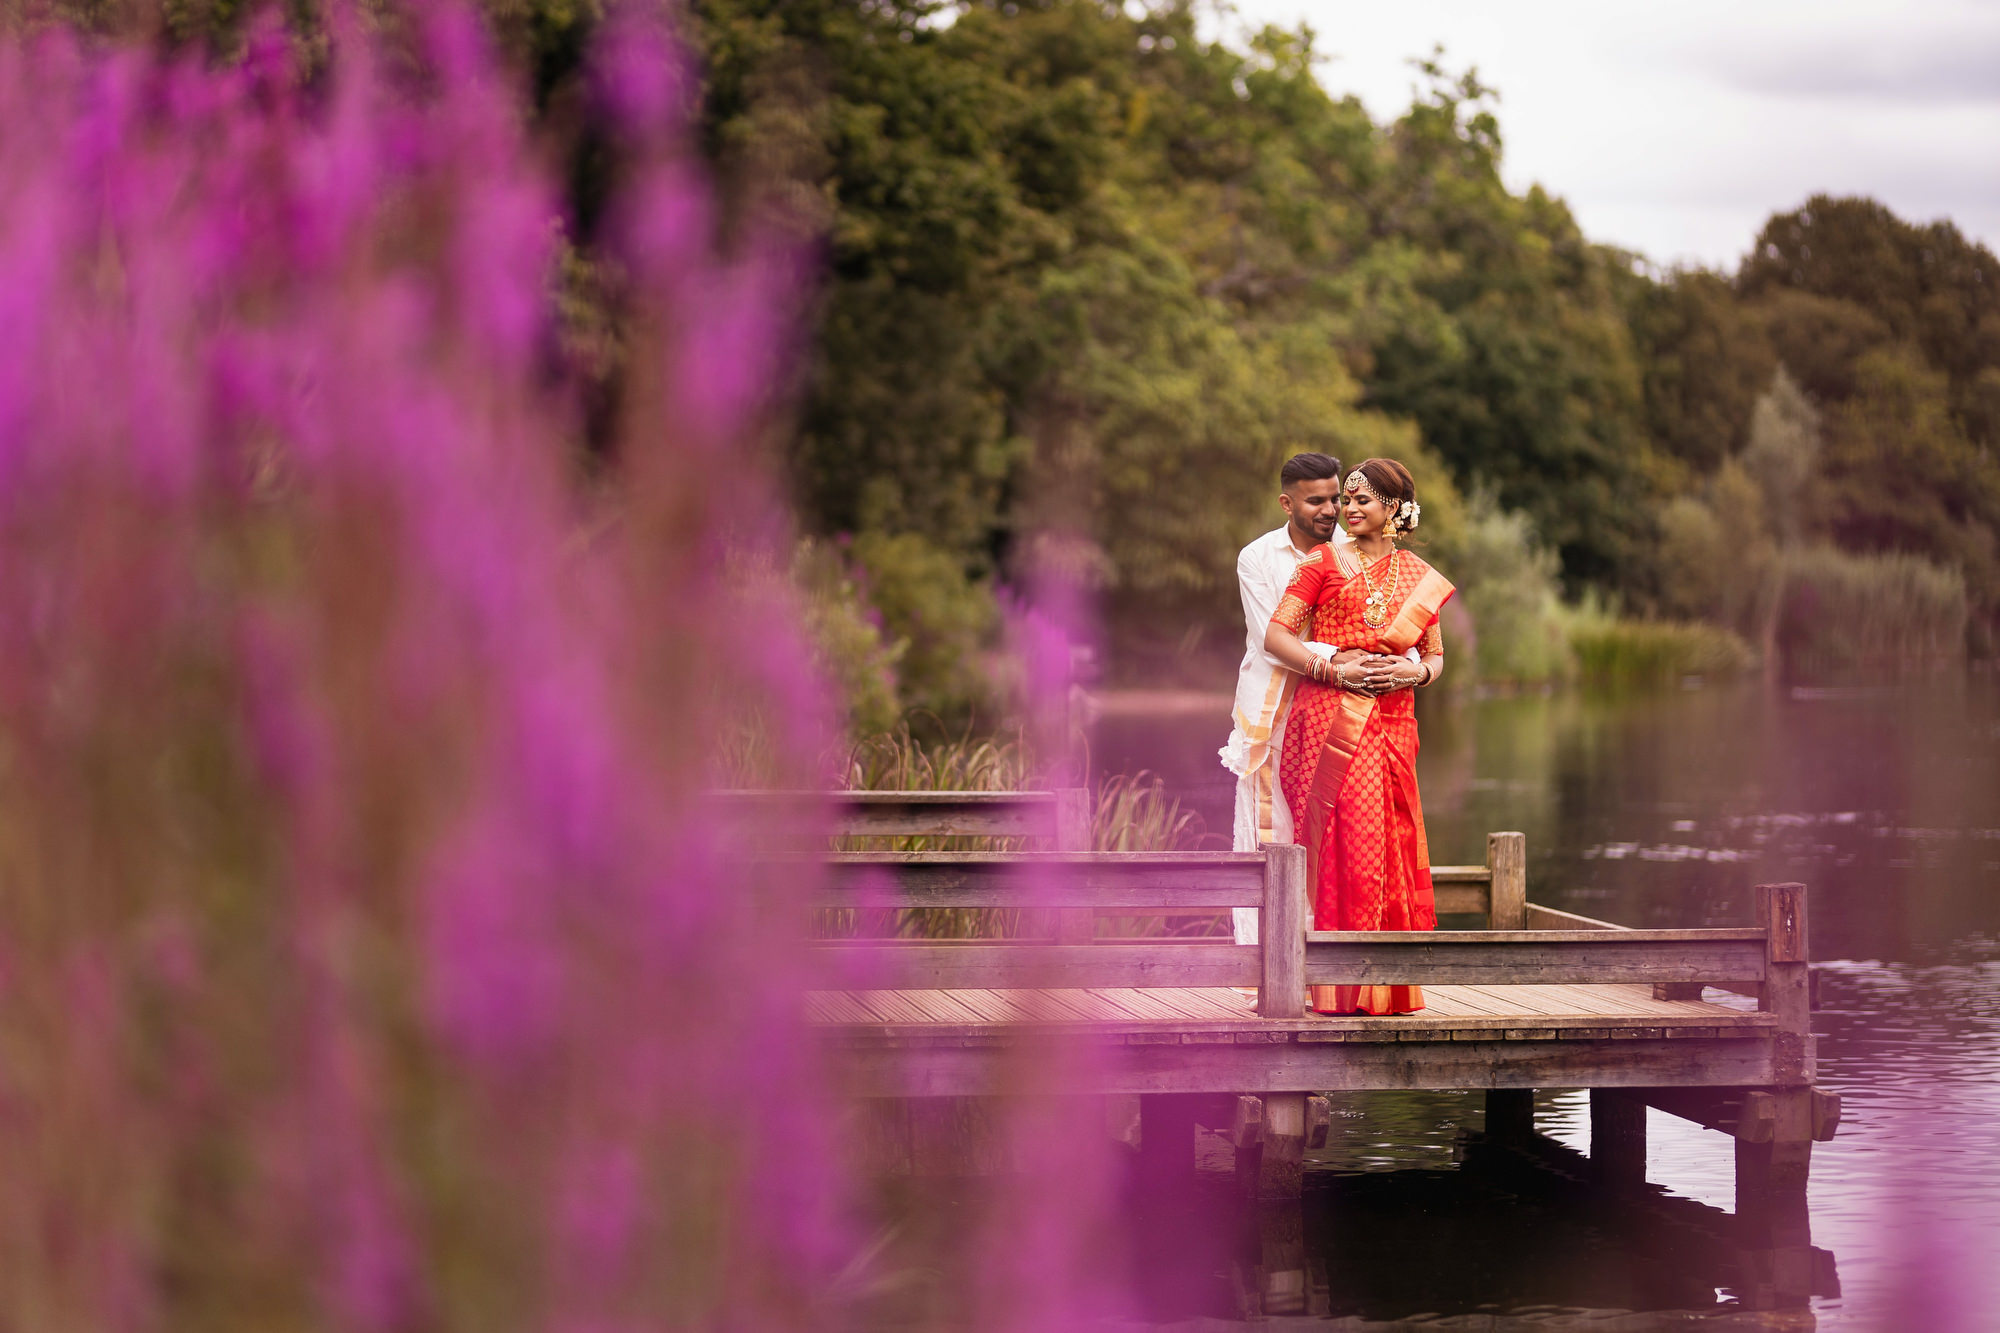 Epping Forest, Tamil Wedding & Reception, London Wedding Photographer, couples portrait